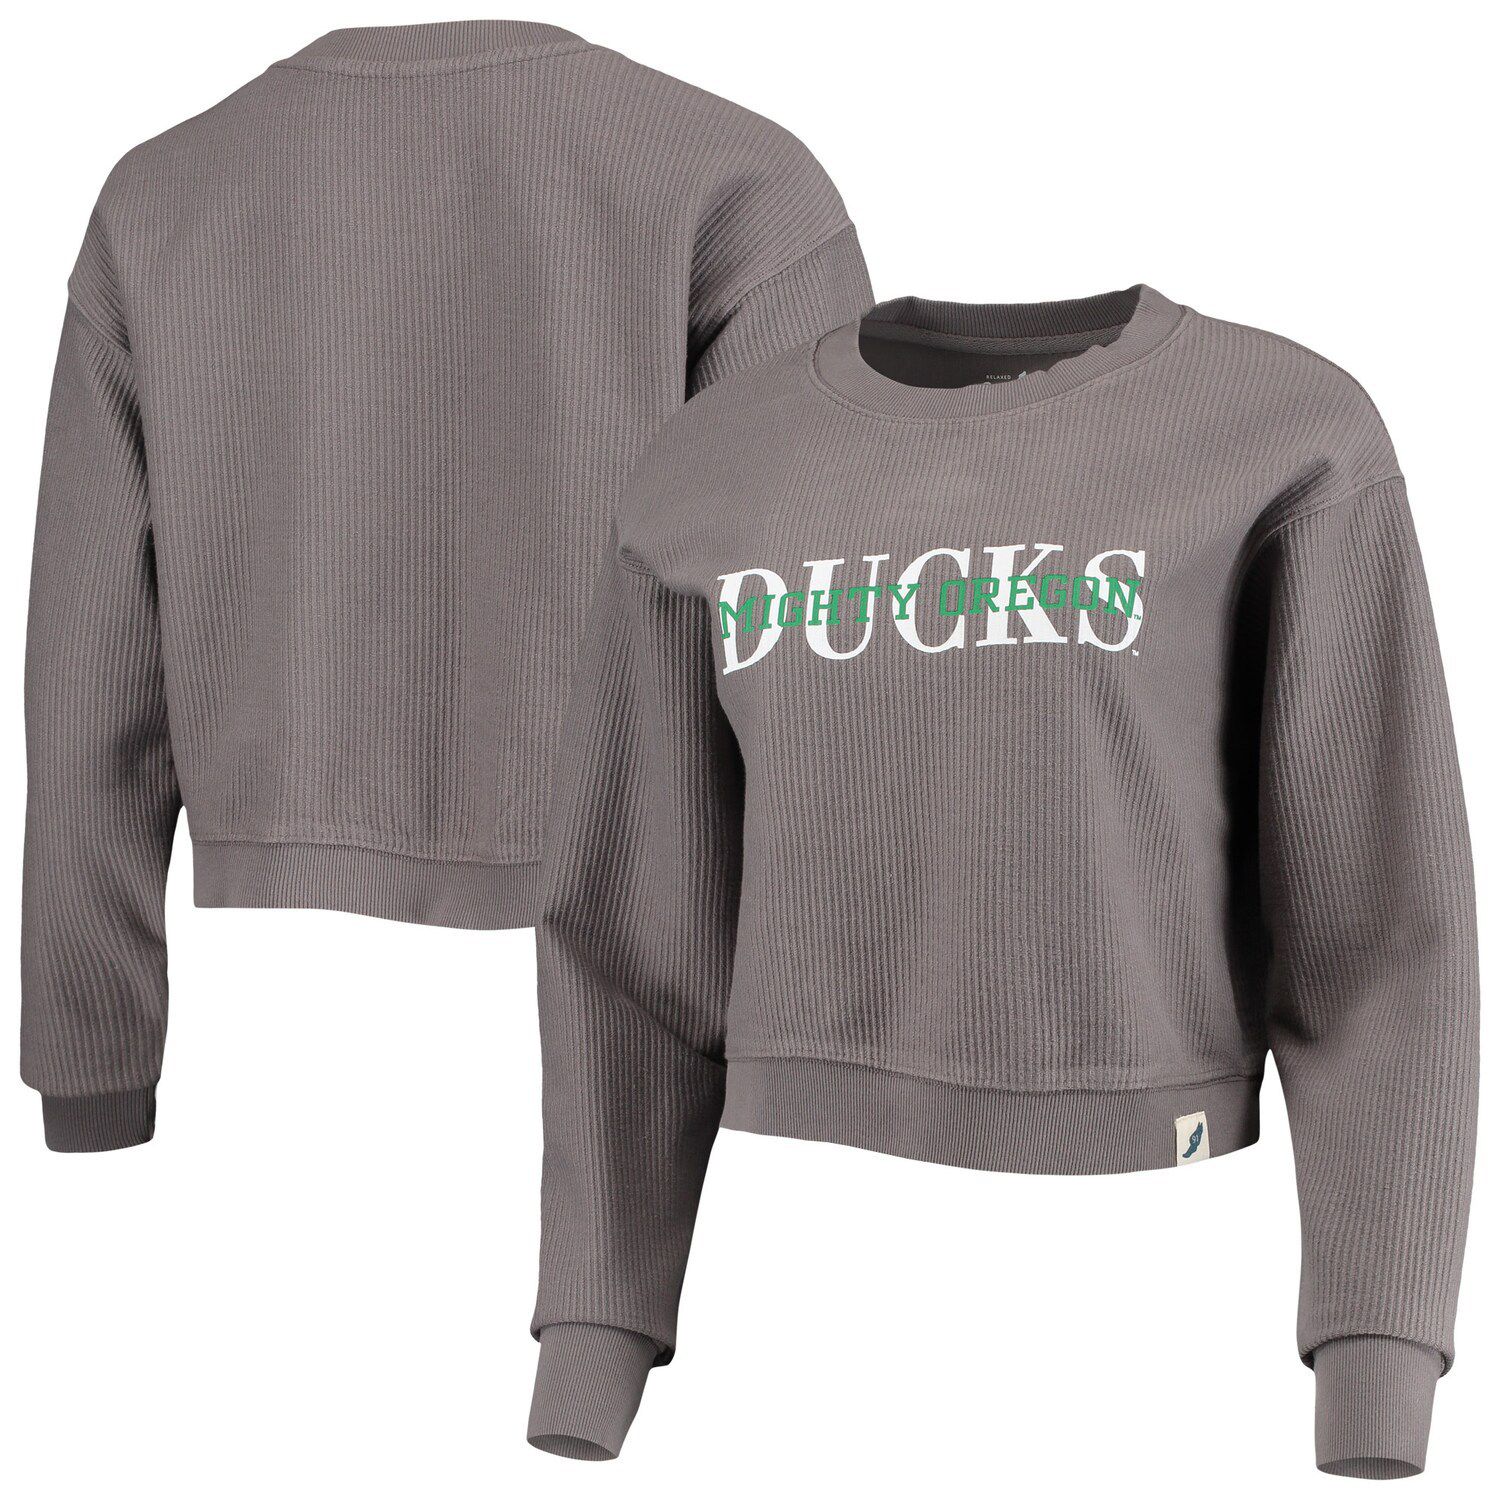 Image for Unbranded Women's League Collegiate Wear Graphite Oregon Ducks Classic Corded Timber Crop Pullover Sweatshirt at Kohl's.